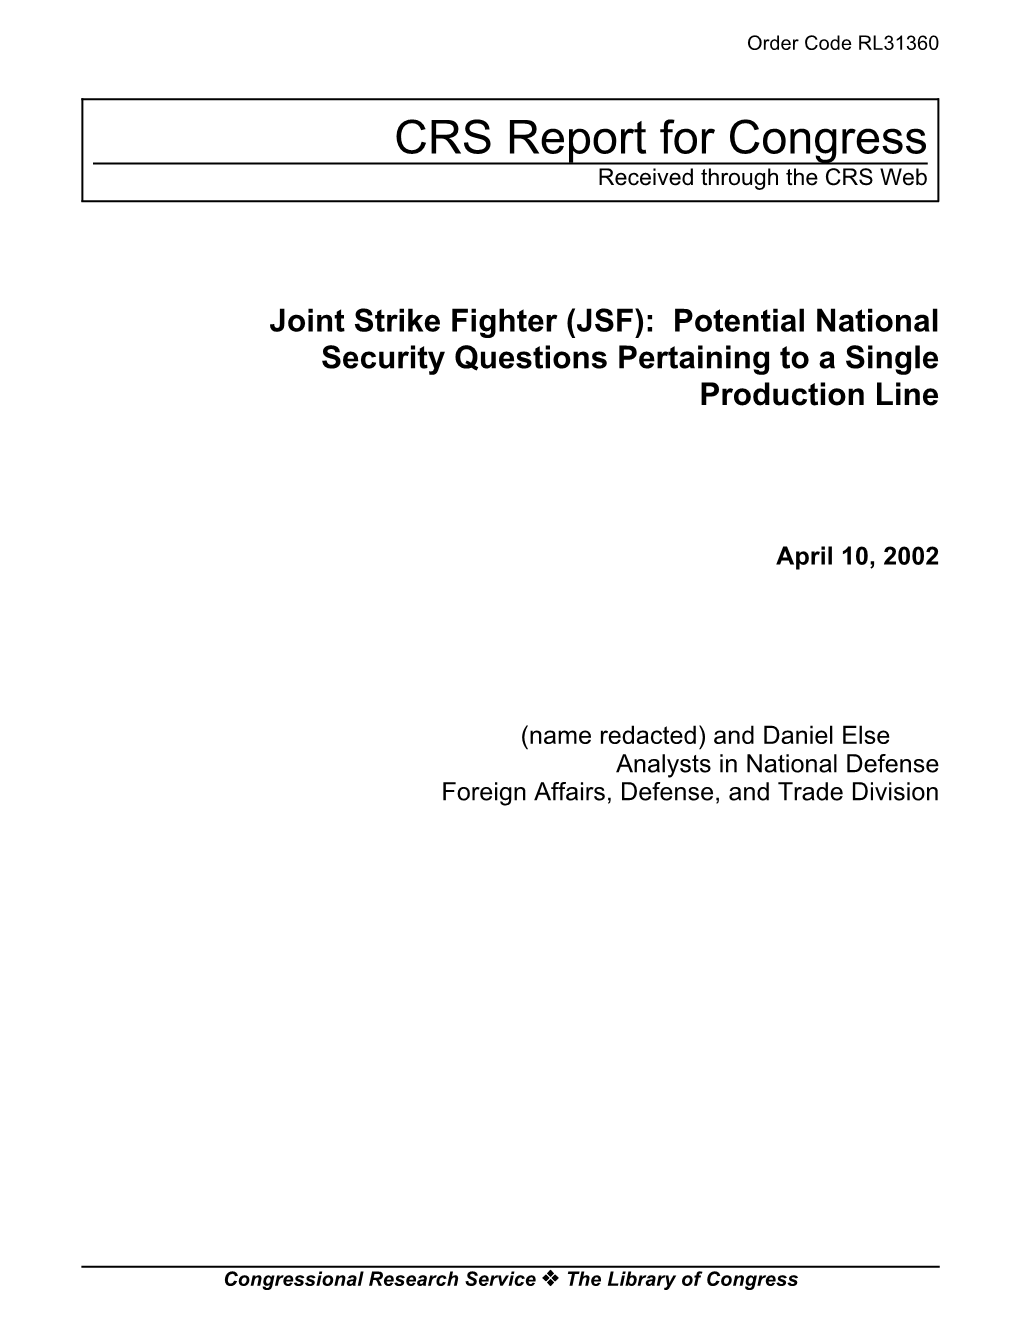 Joint Strike Fighter (JSF): Potential National Security Questions Pertaining to a Single Production Line